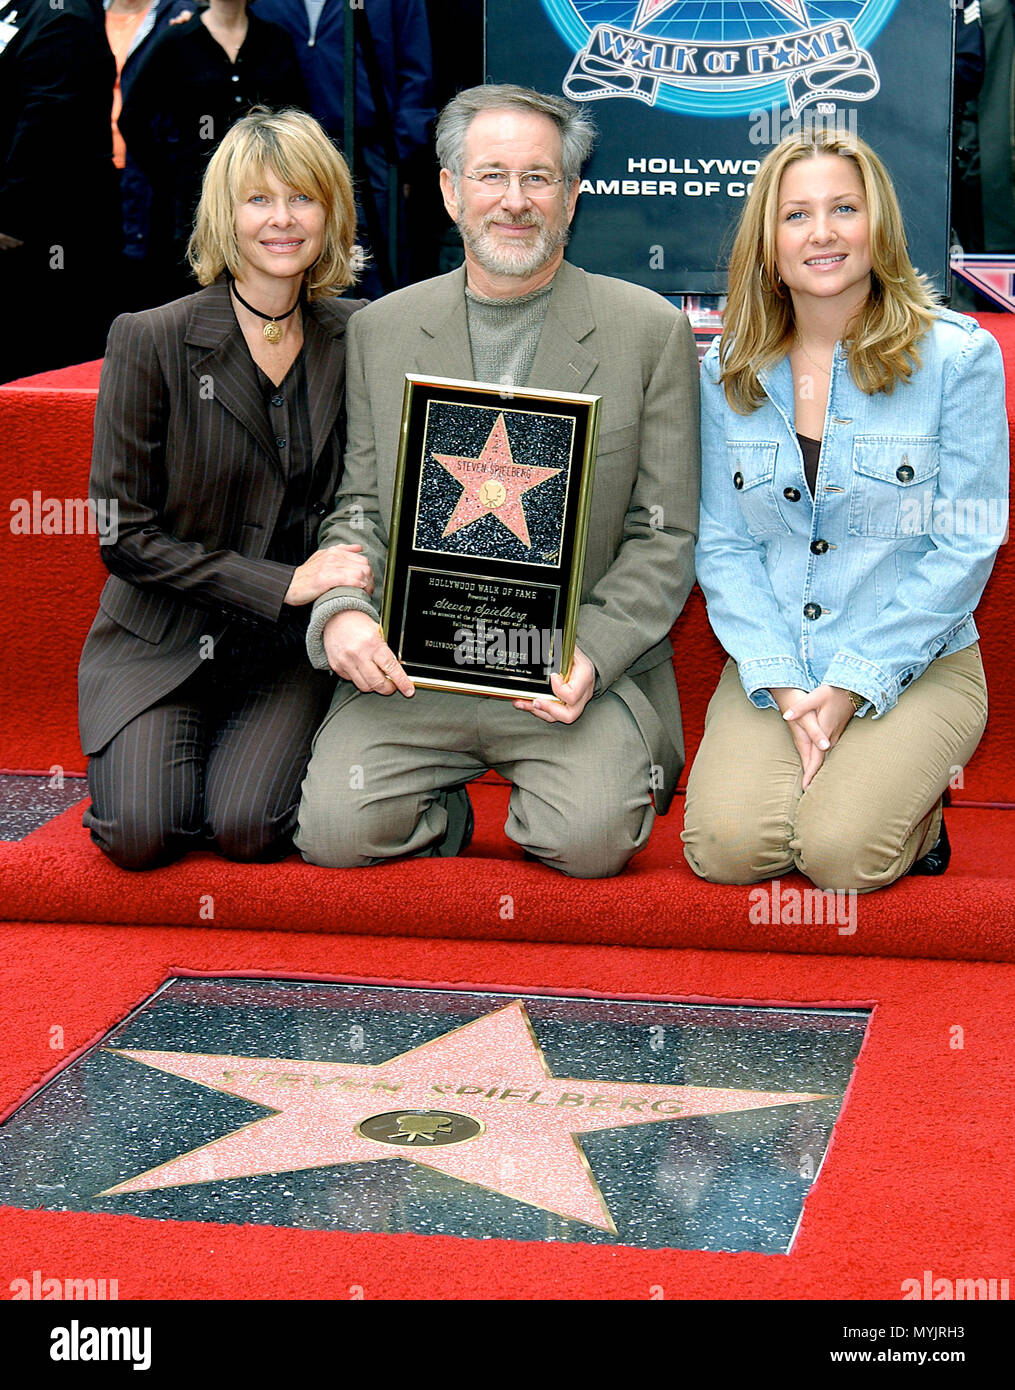 Rig mand entreprenør kinakål Steven Spielberg (with wife Kate Capshaw and daughter Jessica Capshaw)  received the 2210th Star on the Hollywood Walk of Fame in Los Angeles.  January 10, 2003. - SpielbergSt CapshawK Jess07.jpgSpielbergSt CapshawK  Jess07